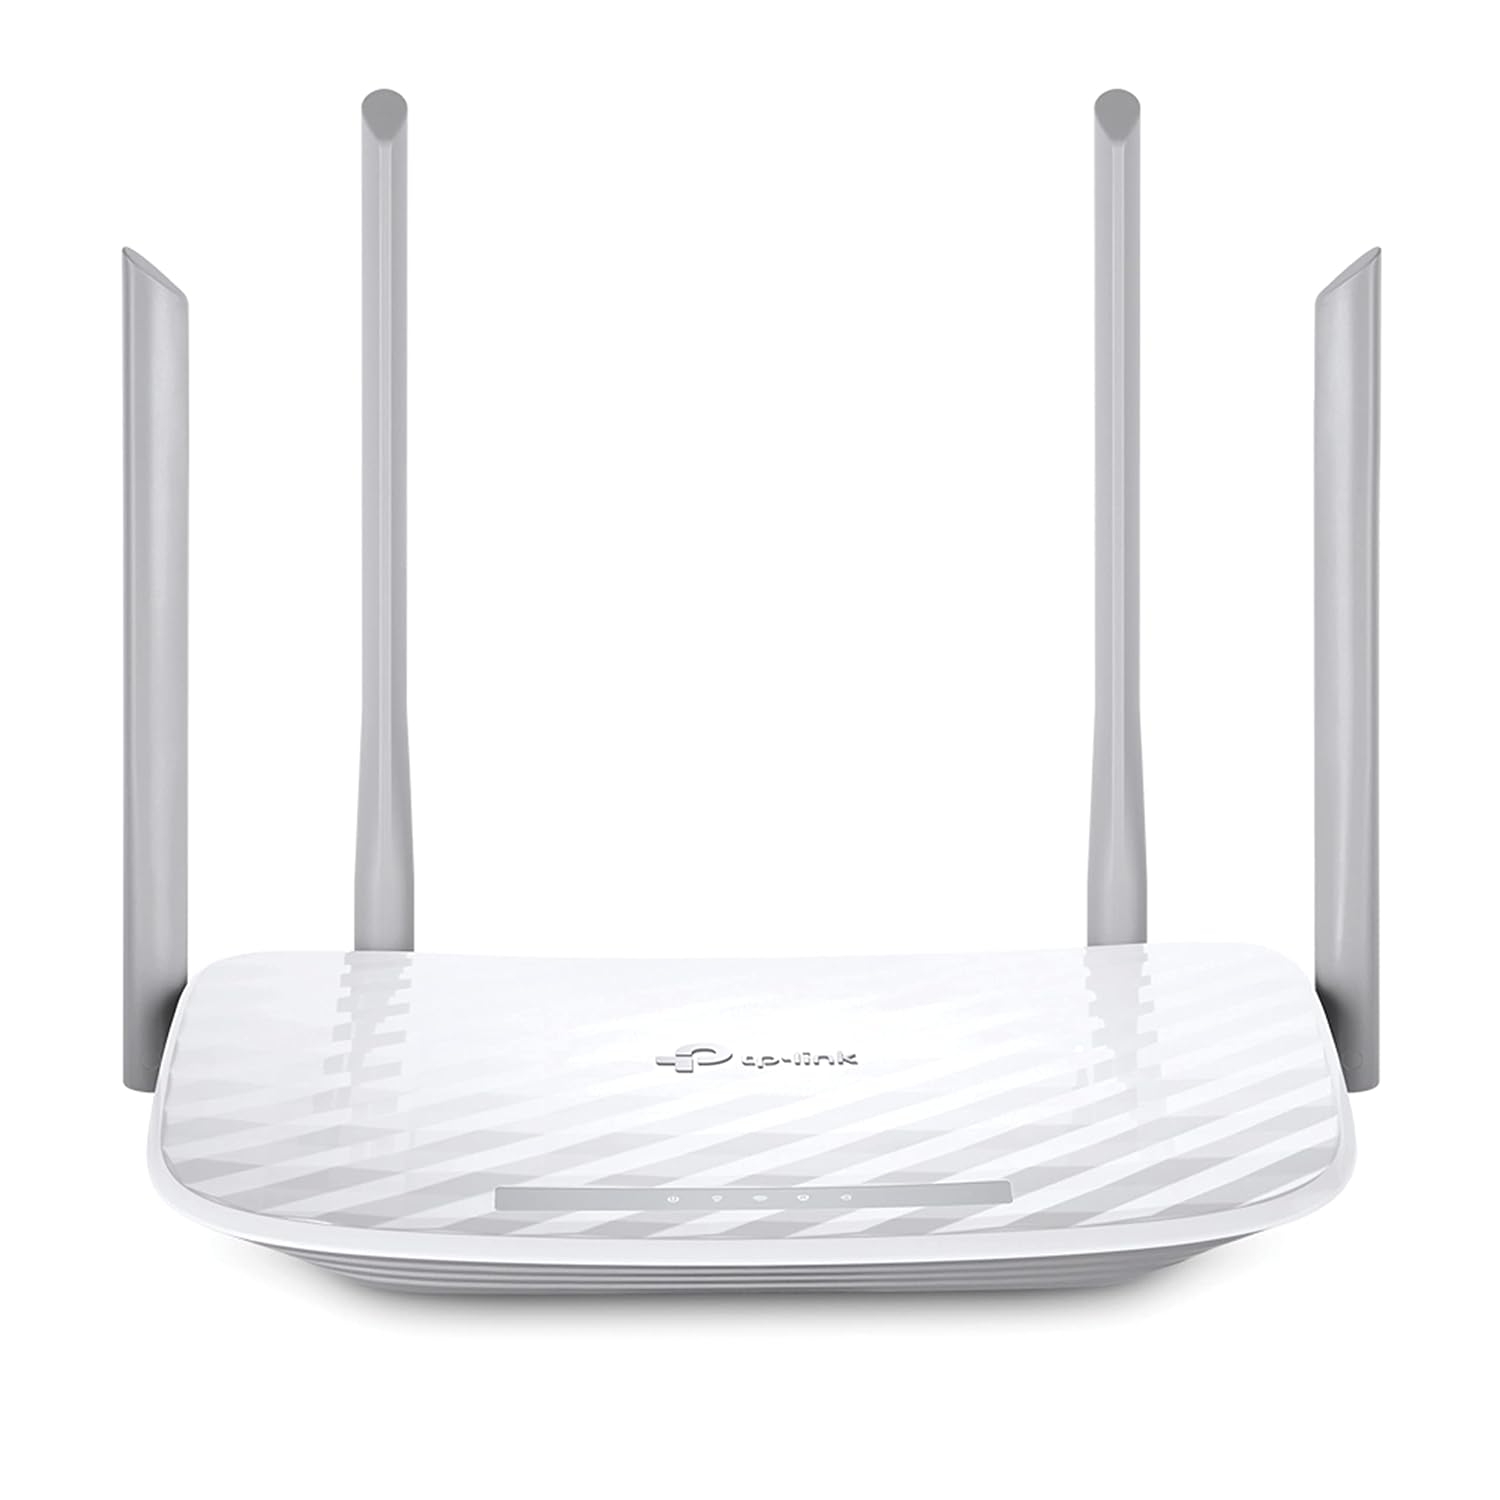 TP-Link Archer C50 Dual Band Wireless Cable Wi-Fi Router, 867mbps/5 GHz + 300mbps/2.4G Speed, Supports Guest Wi-Fi - AC1200